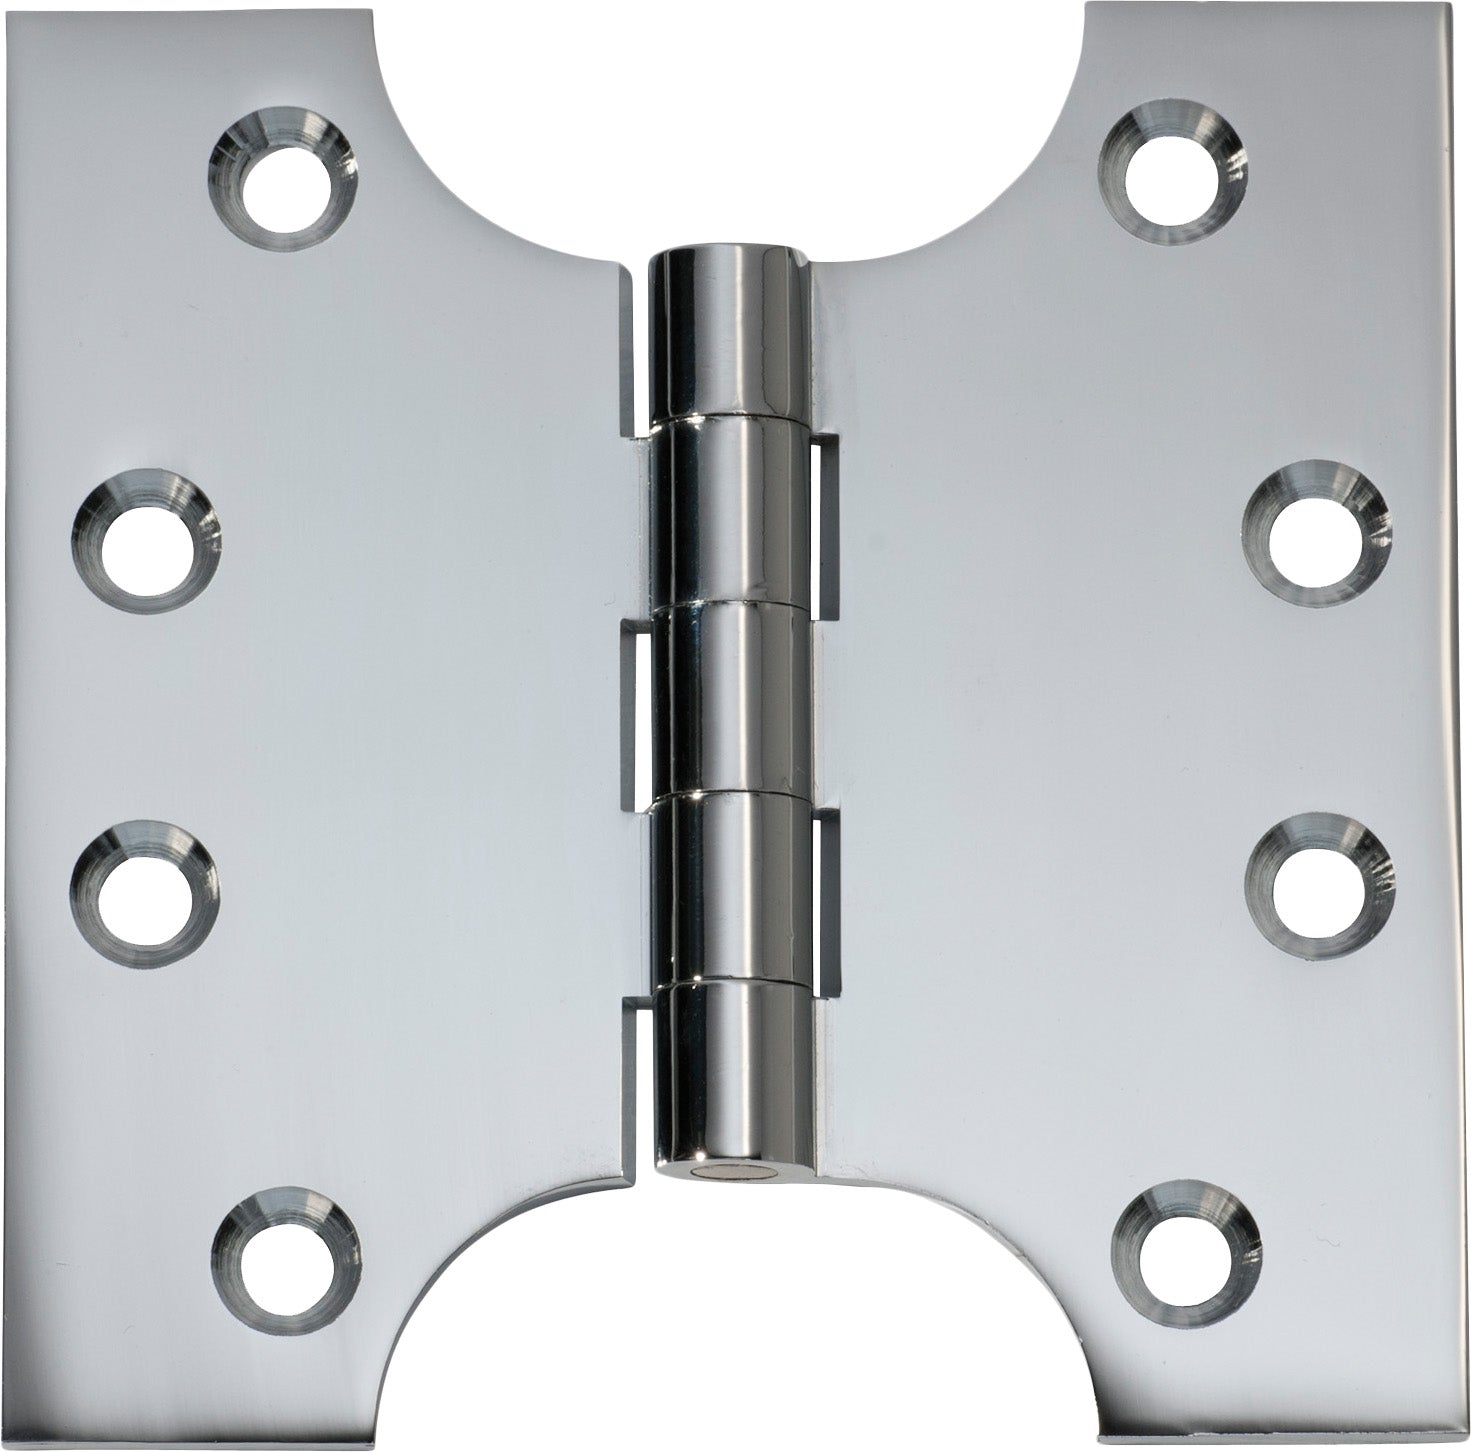 Tradco Shutter Parliament Hinge Chrome Plated H100xW100xT4mm in Chrome Plated